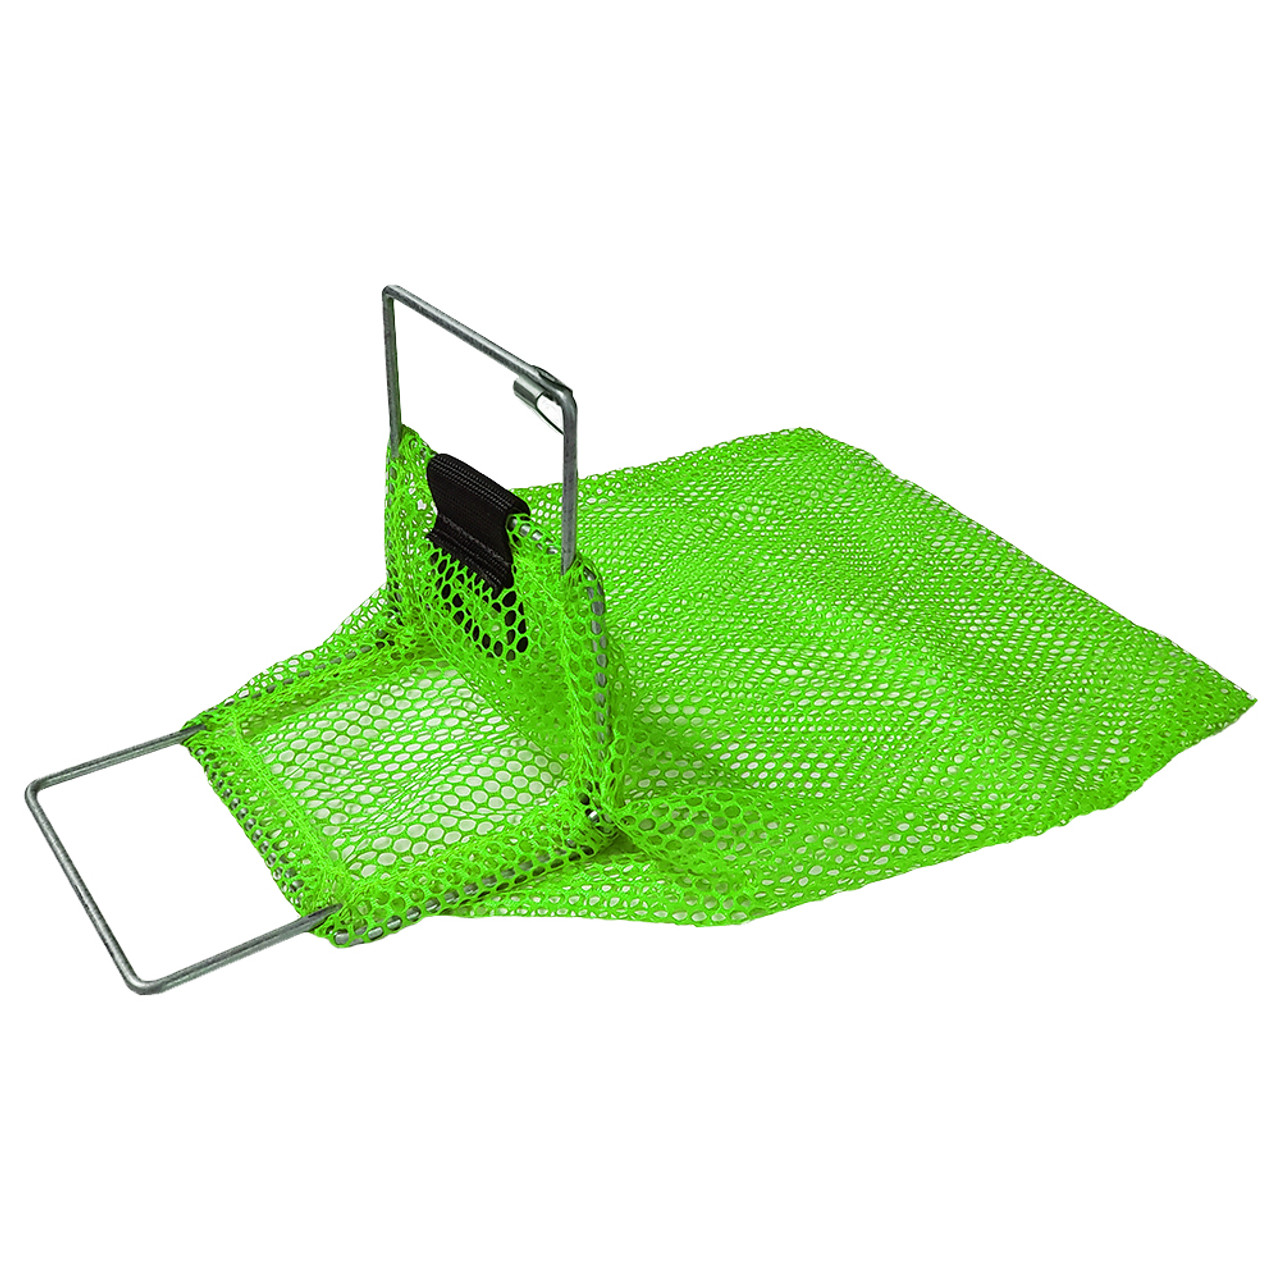 Mini Galvanized Wire Handle Mesh Catch Bag with D-Ring, Approx. 10x15 (5x7 Opening), Green